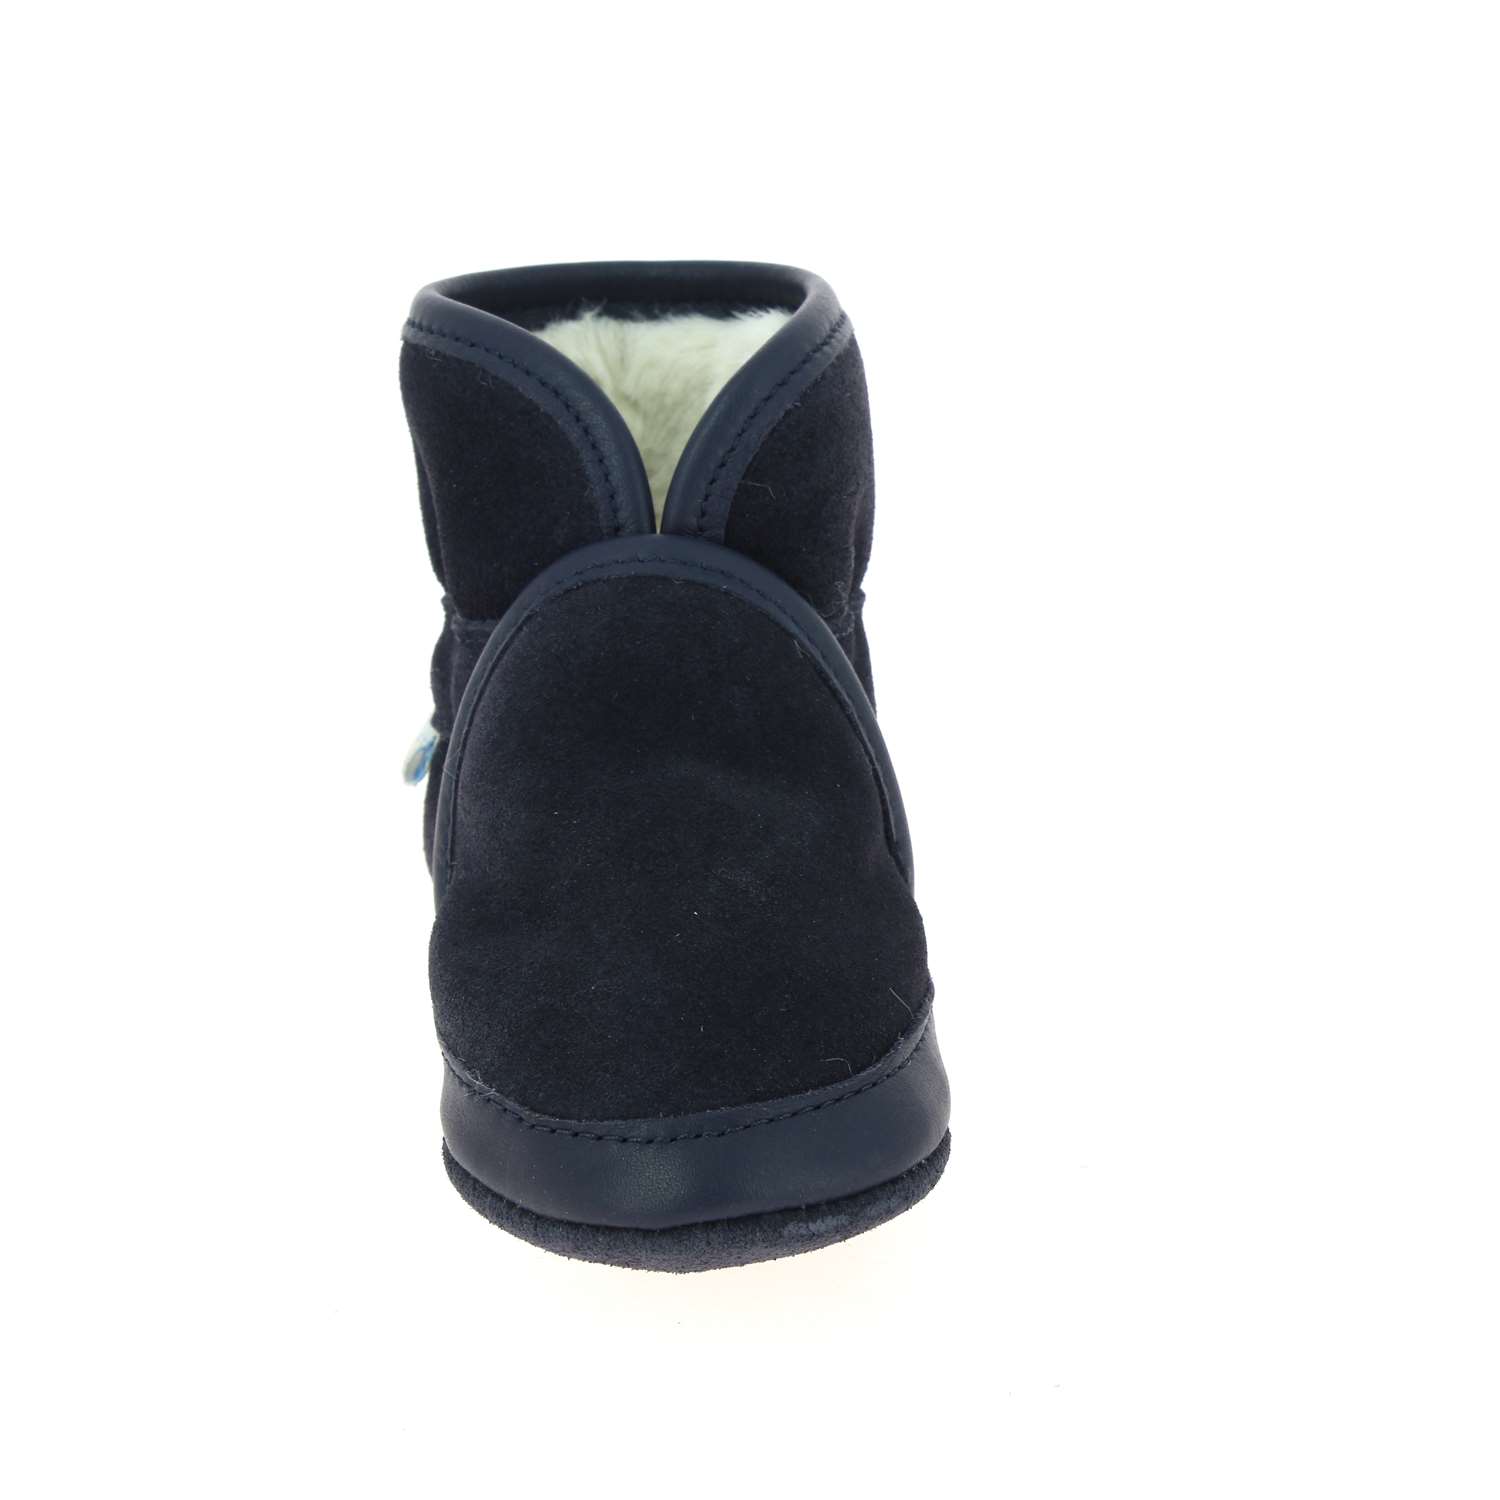 04 - COOL BOOT - ROBEEZ - Chaussons - Nubuck